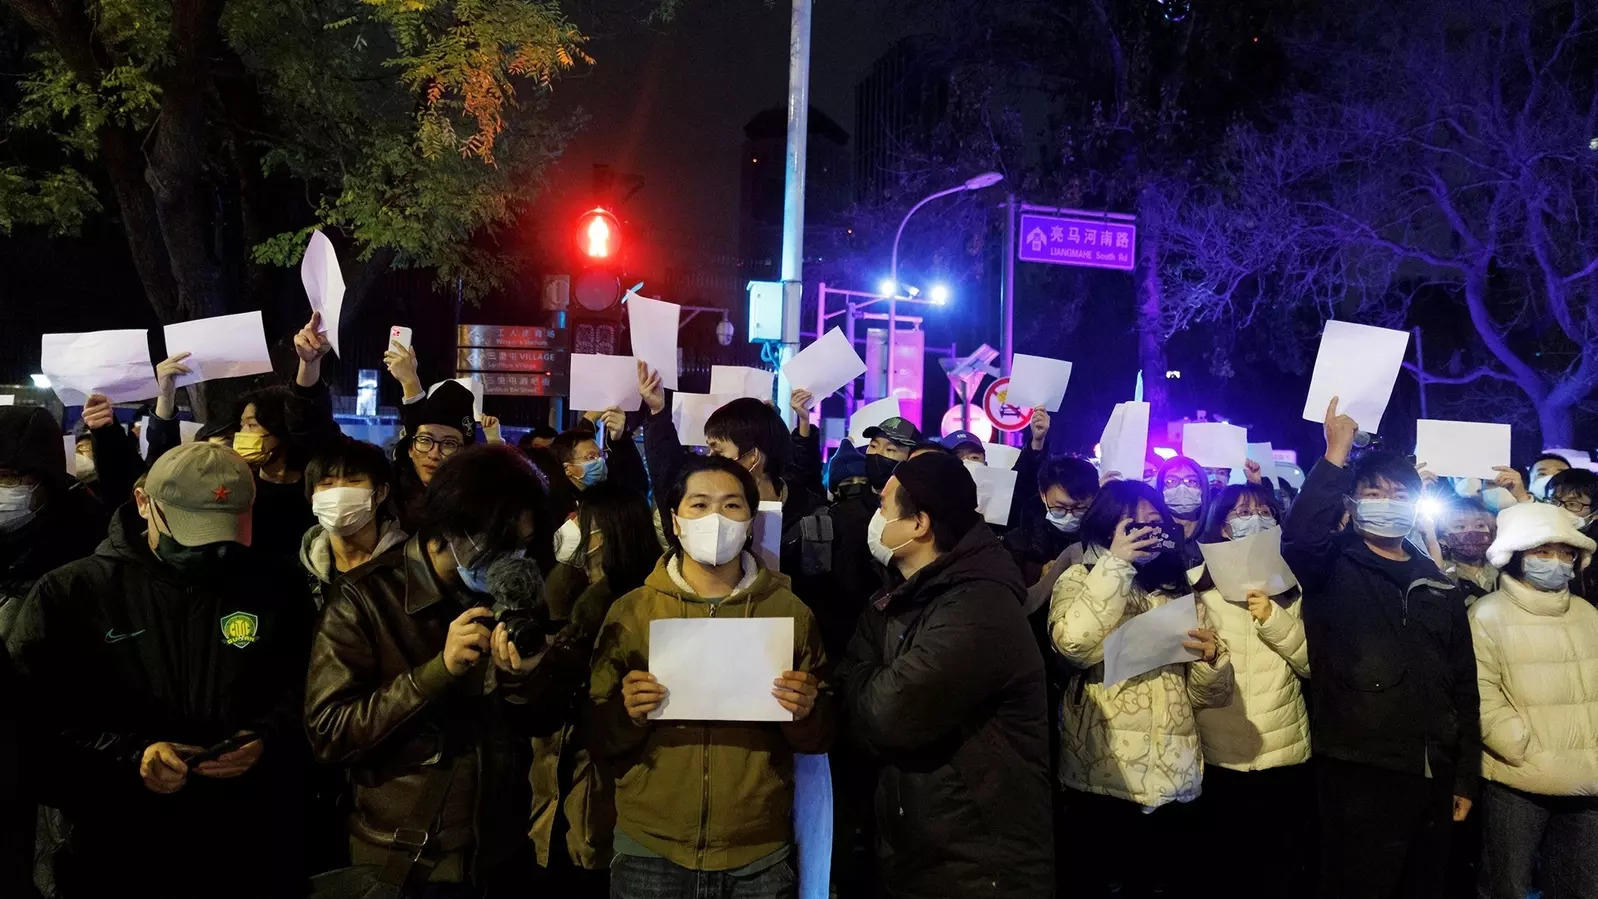 Protests against Xi Jinping government in China